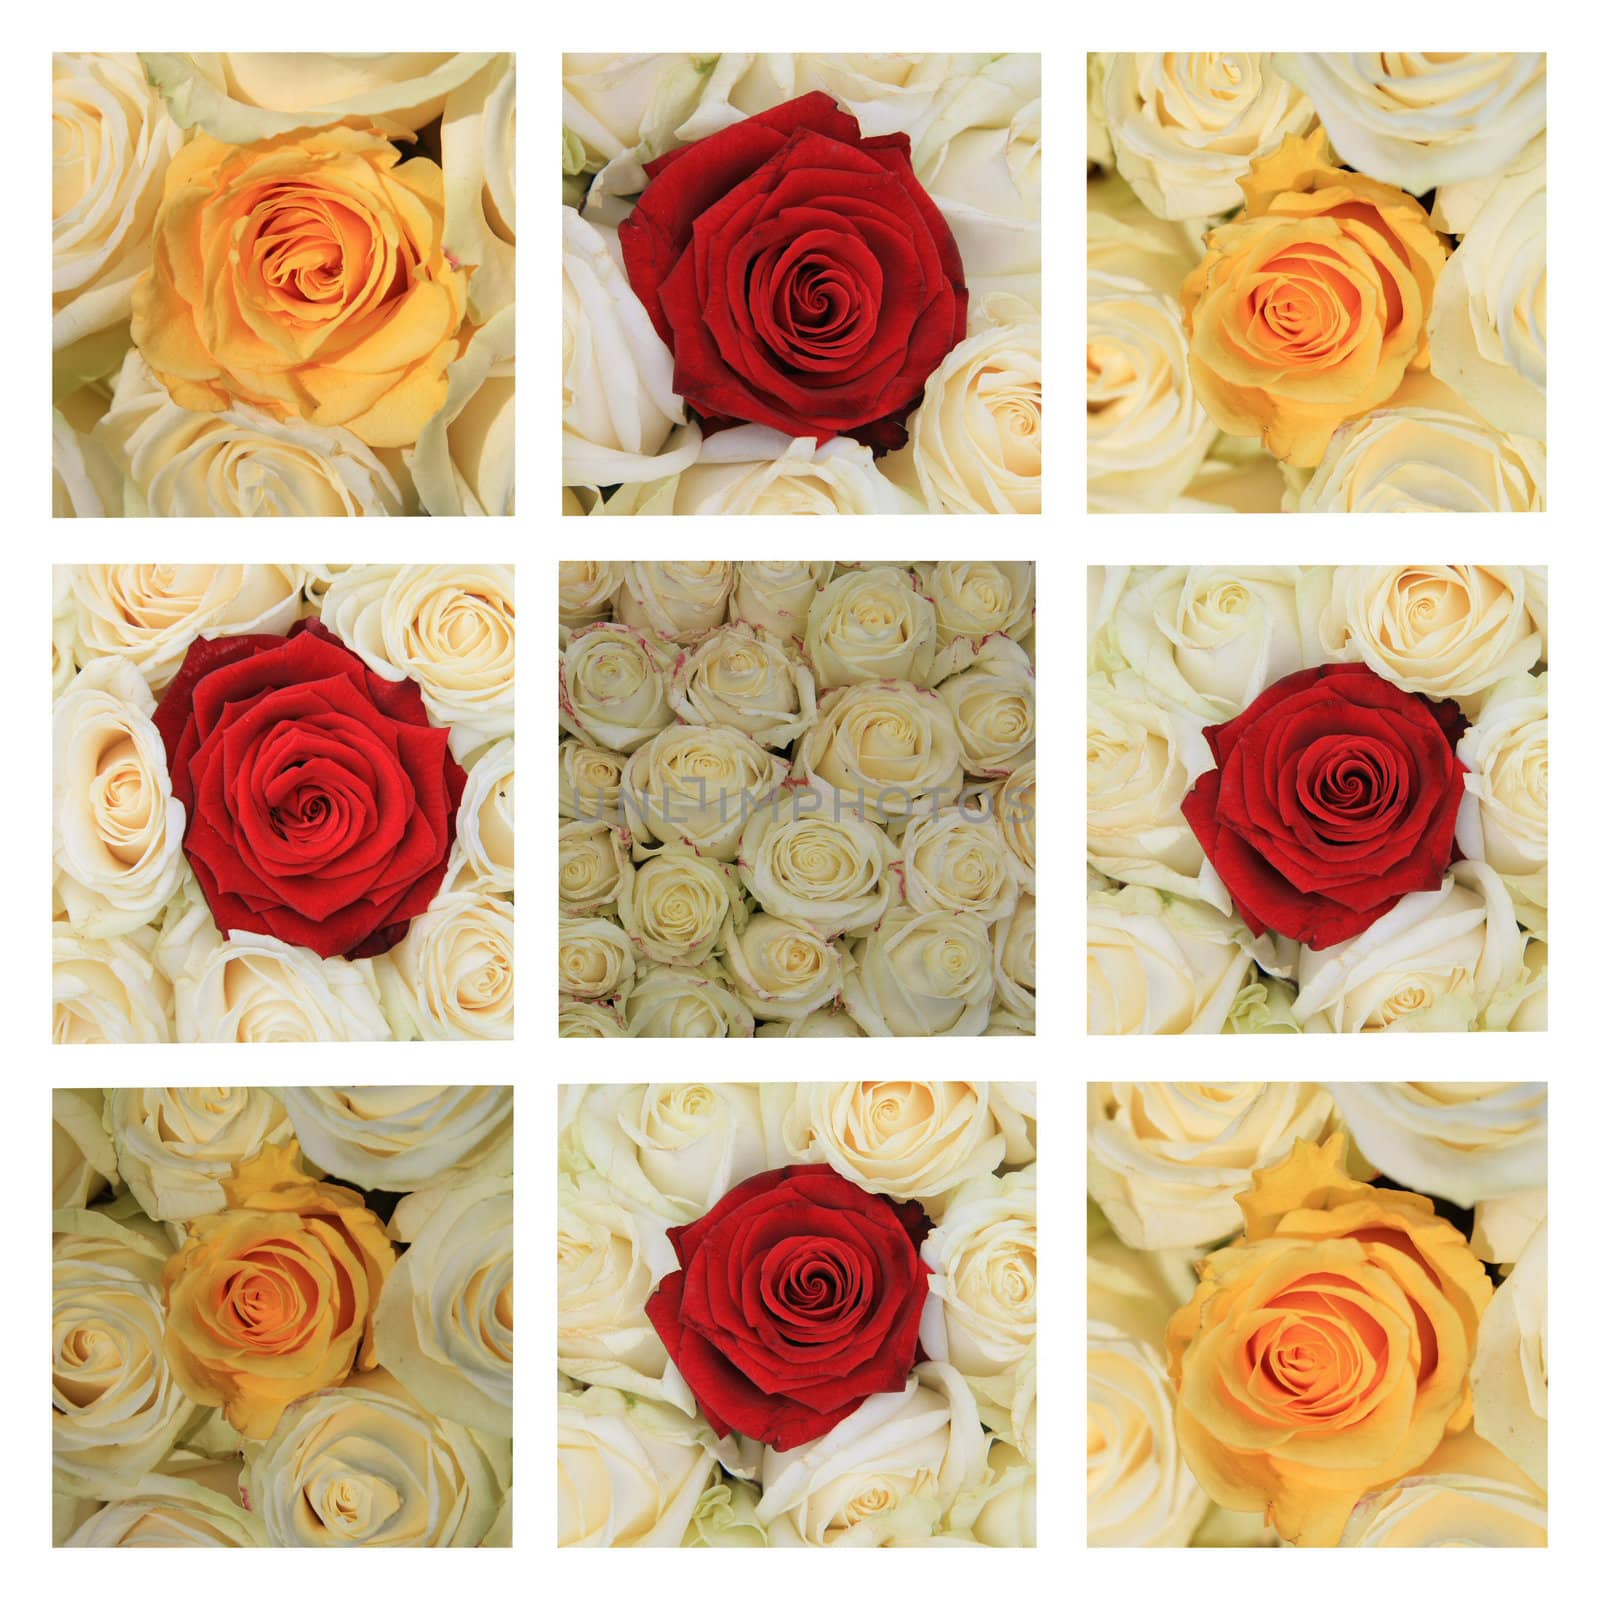 xL-collage made from 9 different high resolution rose images in white, yellow and red